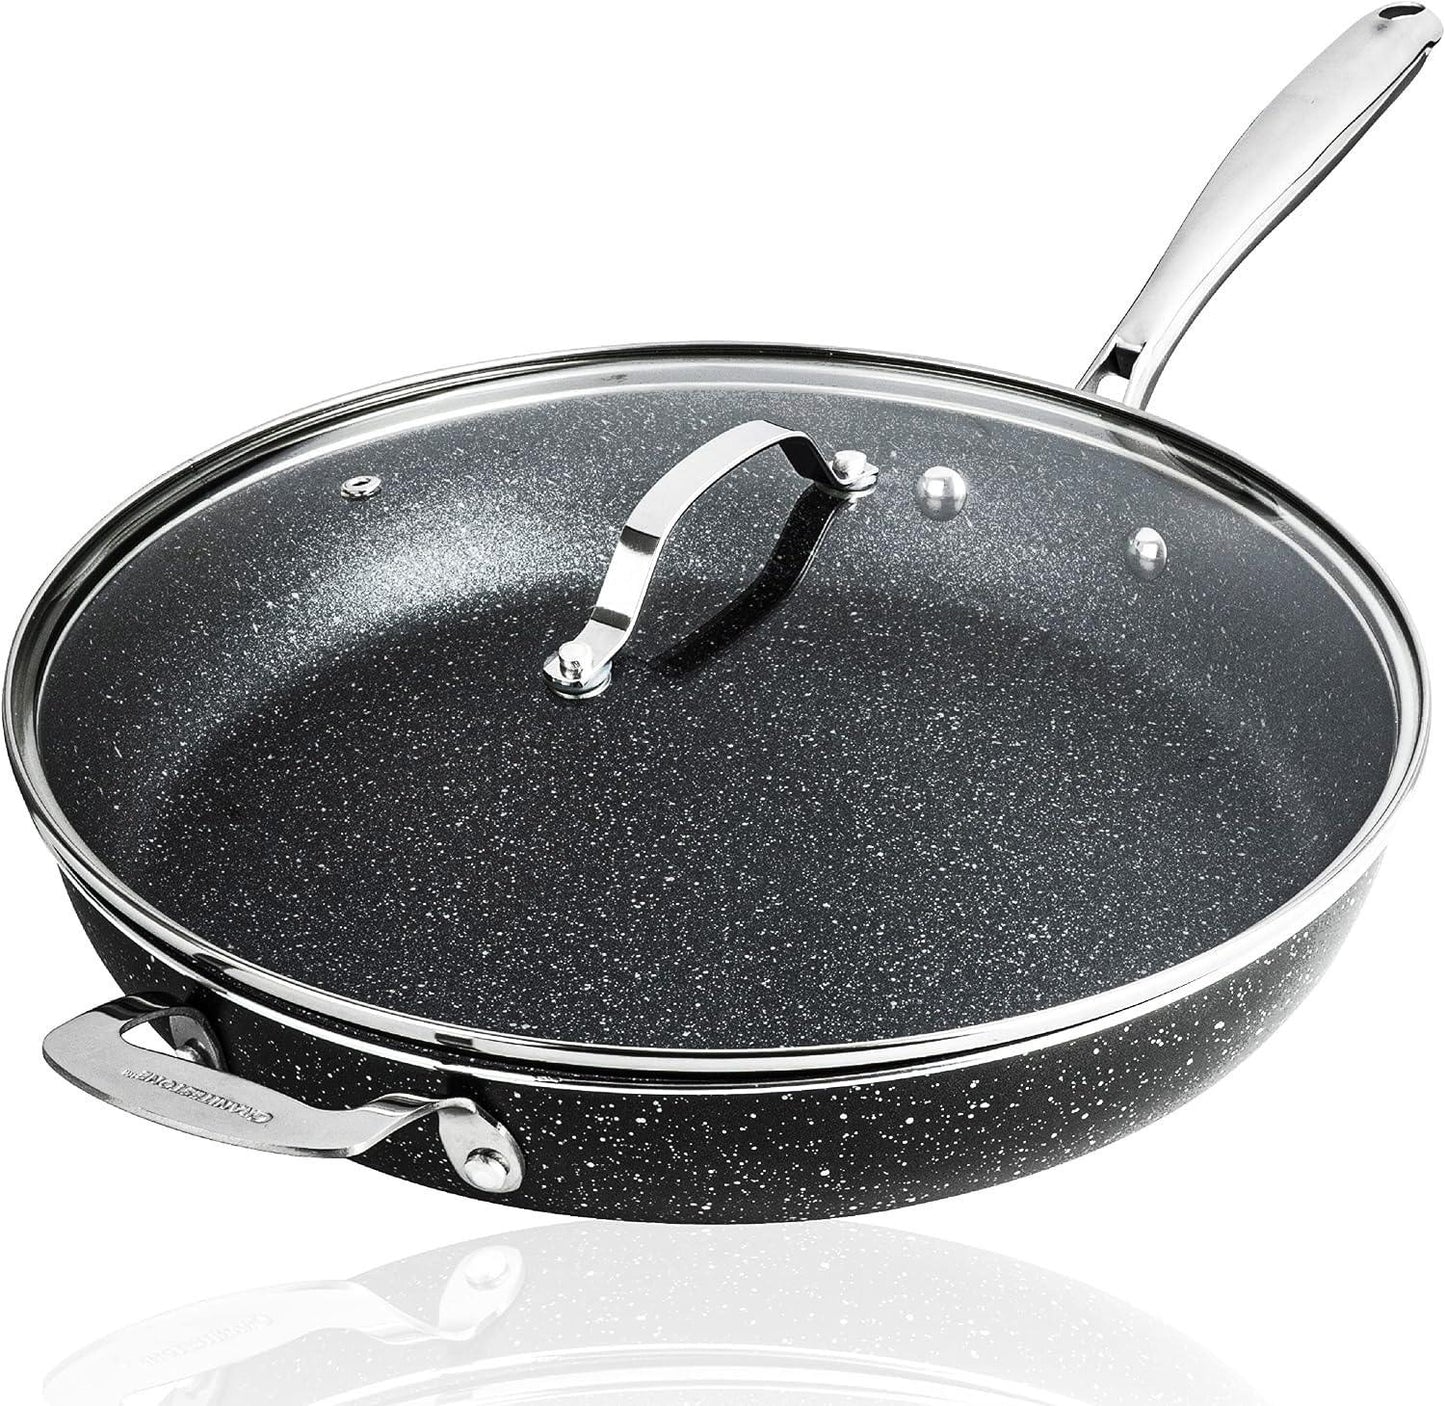 Granitestone 14 Inch Frying Pan with Lid, Large Non Stick Skillet for Cooking, Nonstick, Ultra Durable Mineral and Diamond Coating, Family Sized Open Skillet, Oven/Dishwasher Safe, Black - CookCave